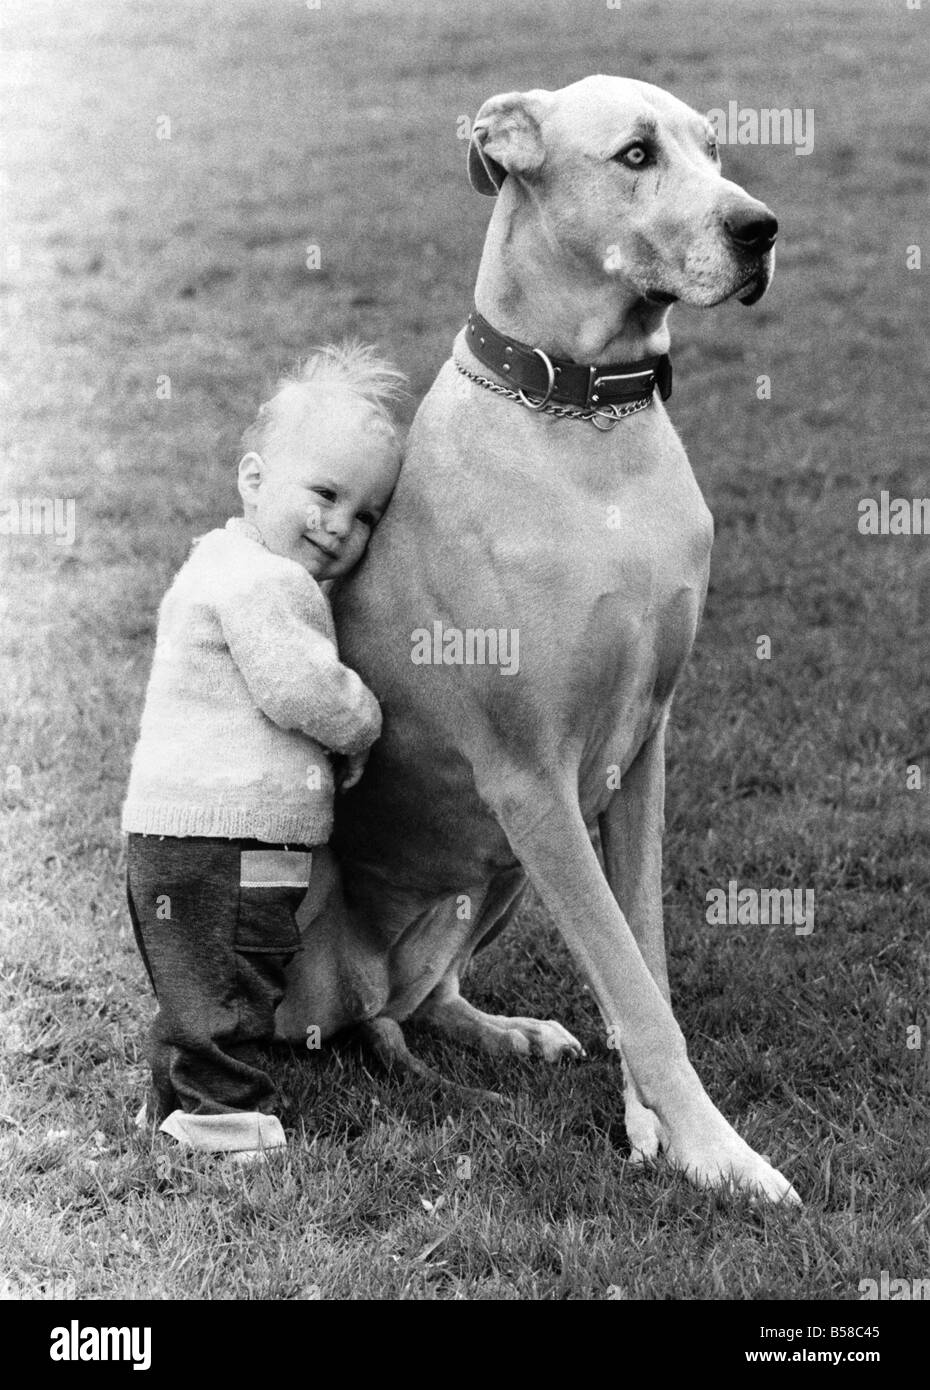 A pet and his pal. &#13;&#10;Giant dog with little boy leaning on him with affection.  &#13;&#10;April 1984 P006070 Stock Photo